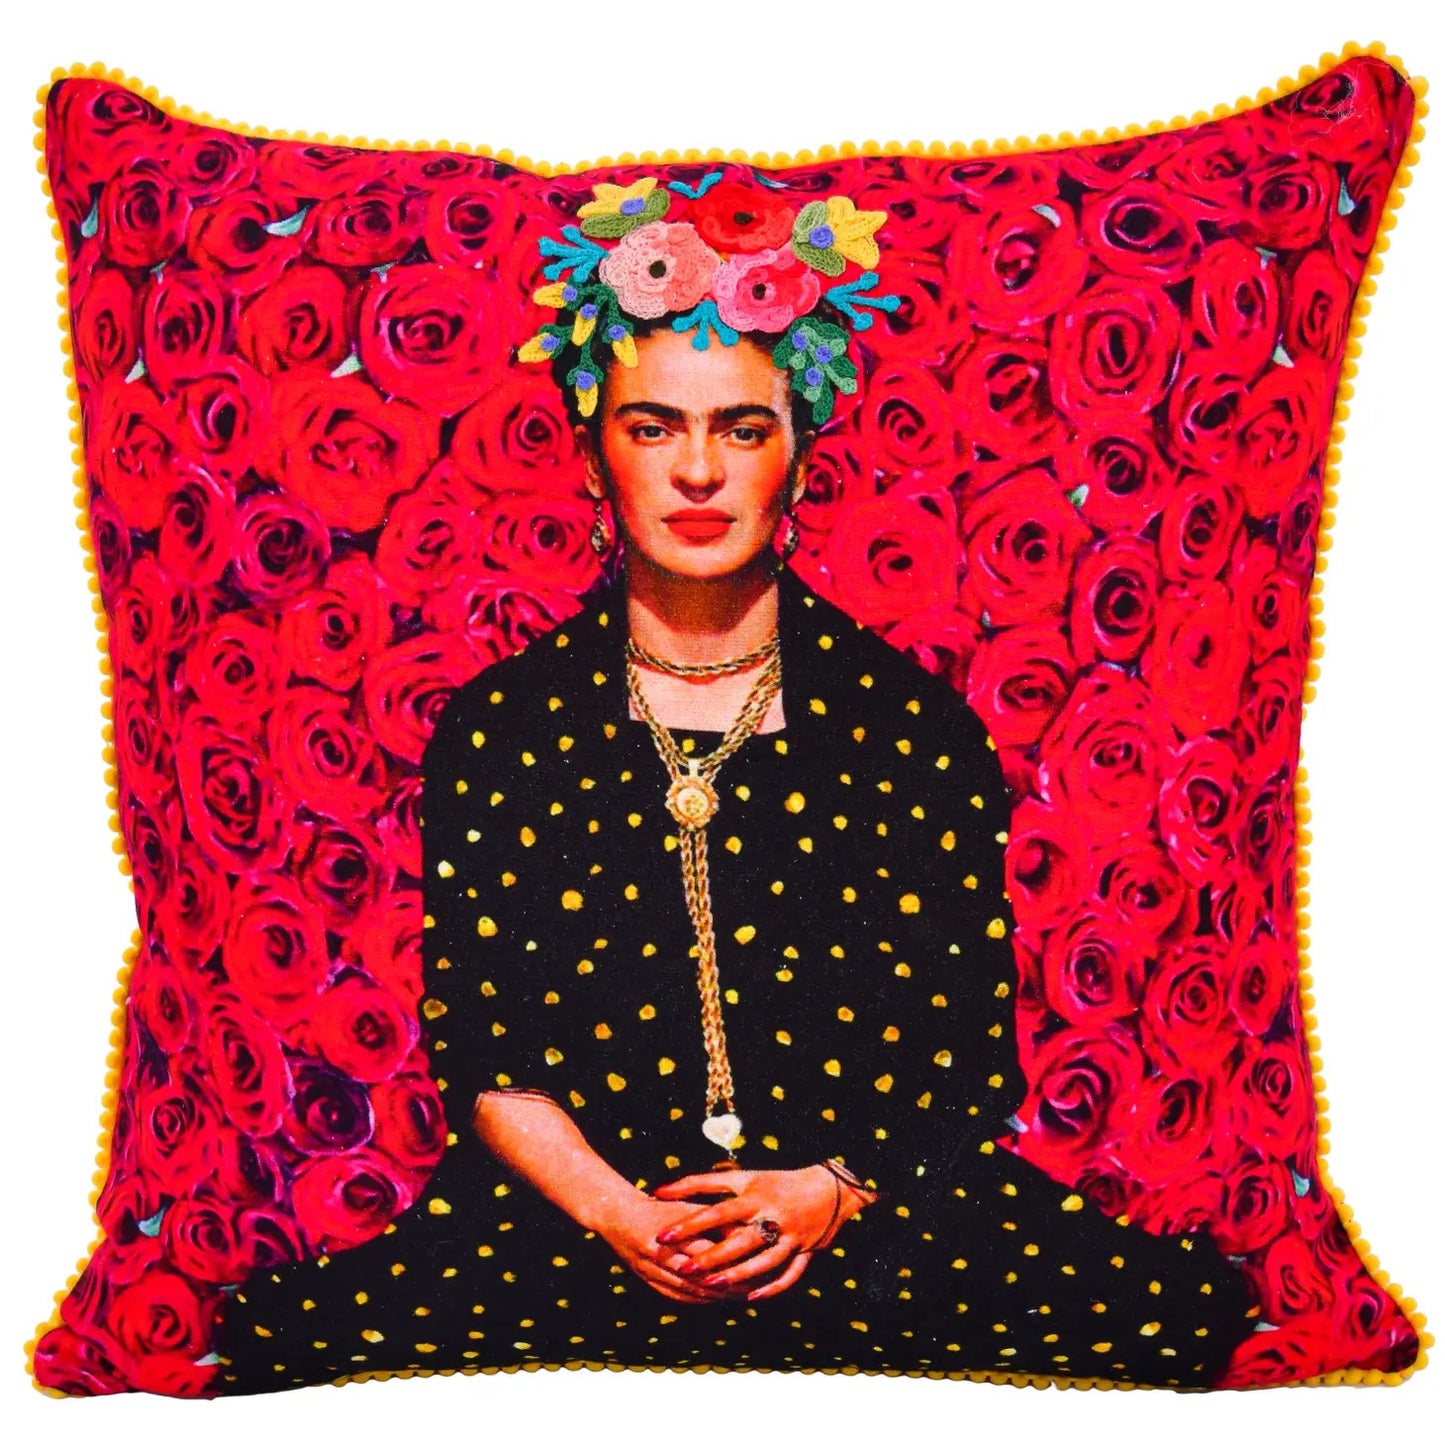 Hand-embroidered pillow with red roses and an image of Frida Kahlo dressed in a black dress with yellow dots. On her head is a wreath of flowers of different colors and the border of the pillow is designed with small yellow pom pons.